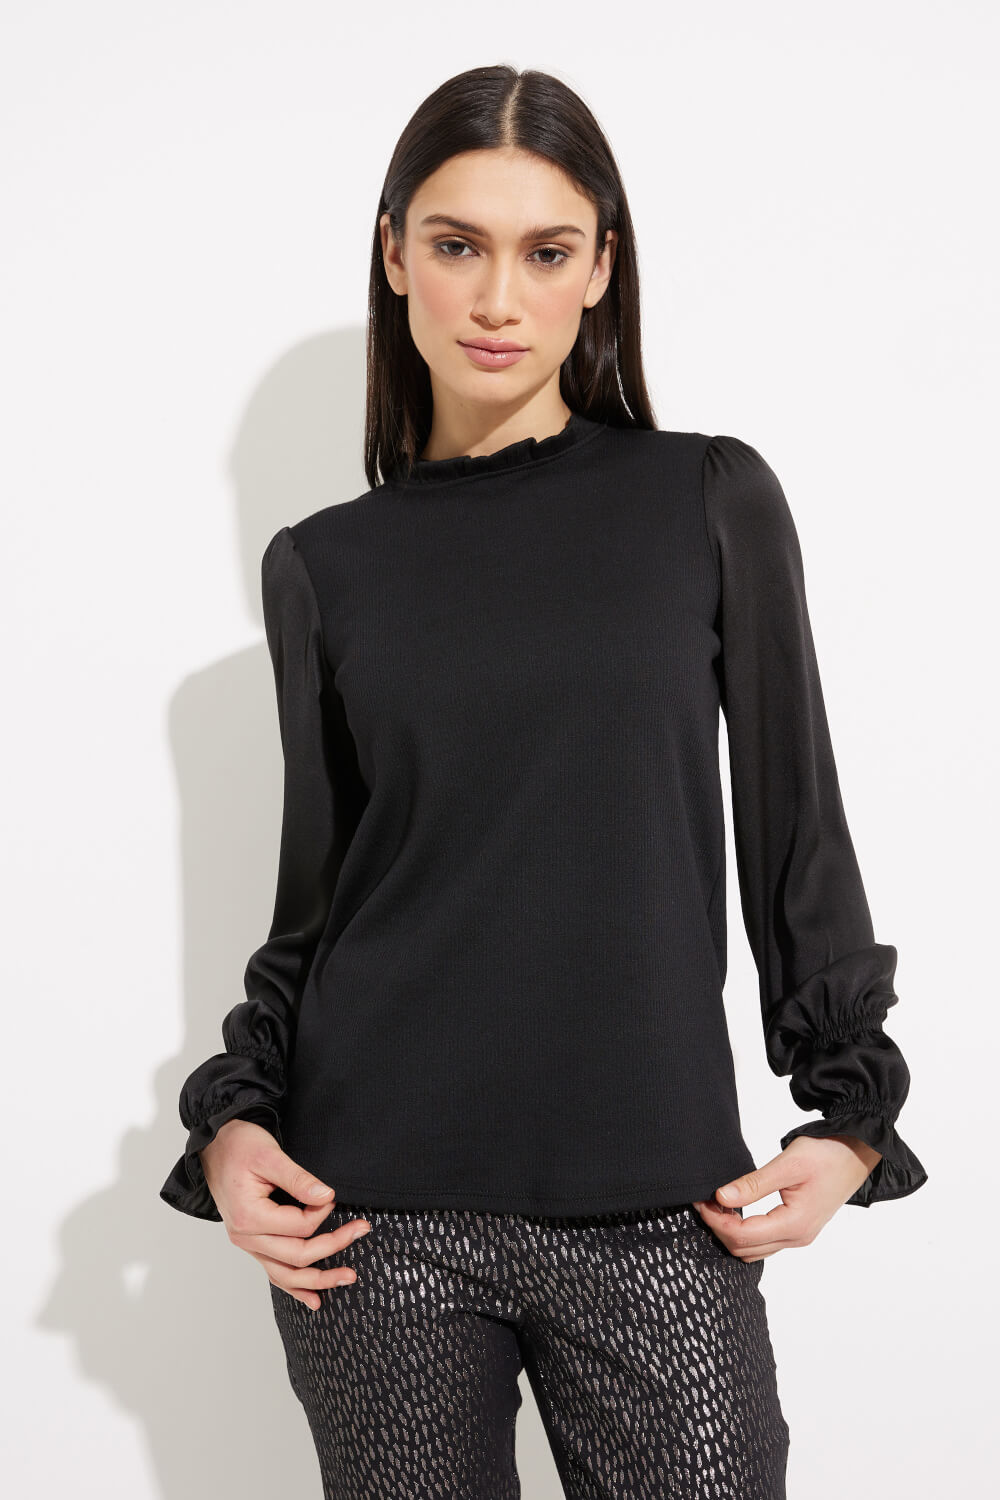 Ruched Detail Top Style 233147. Black/black